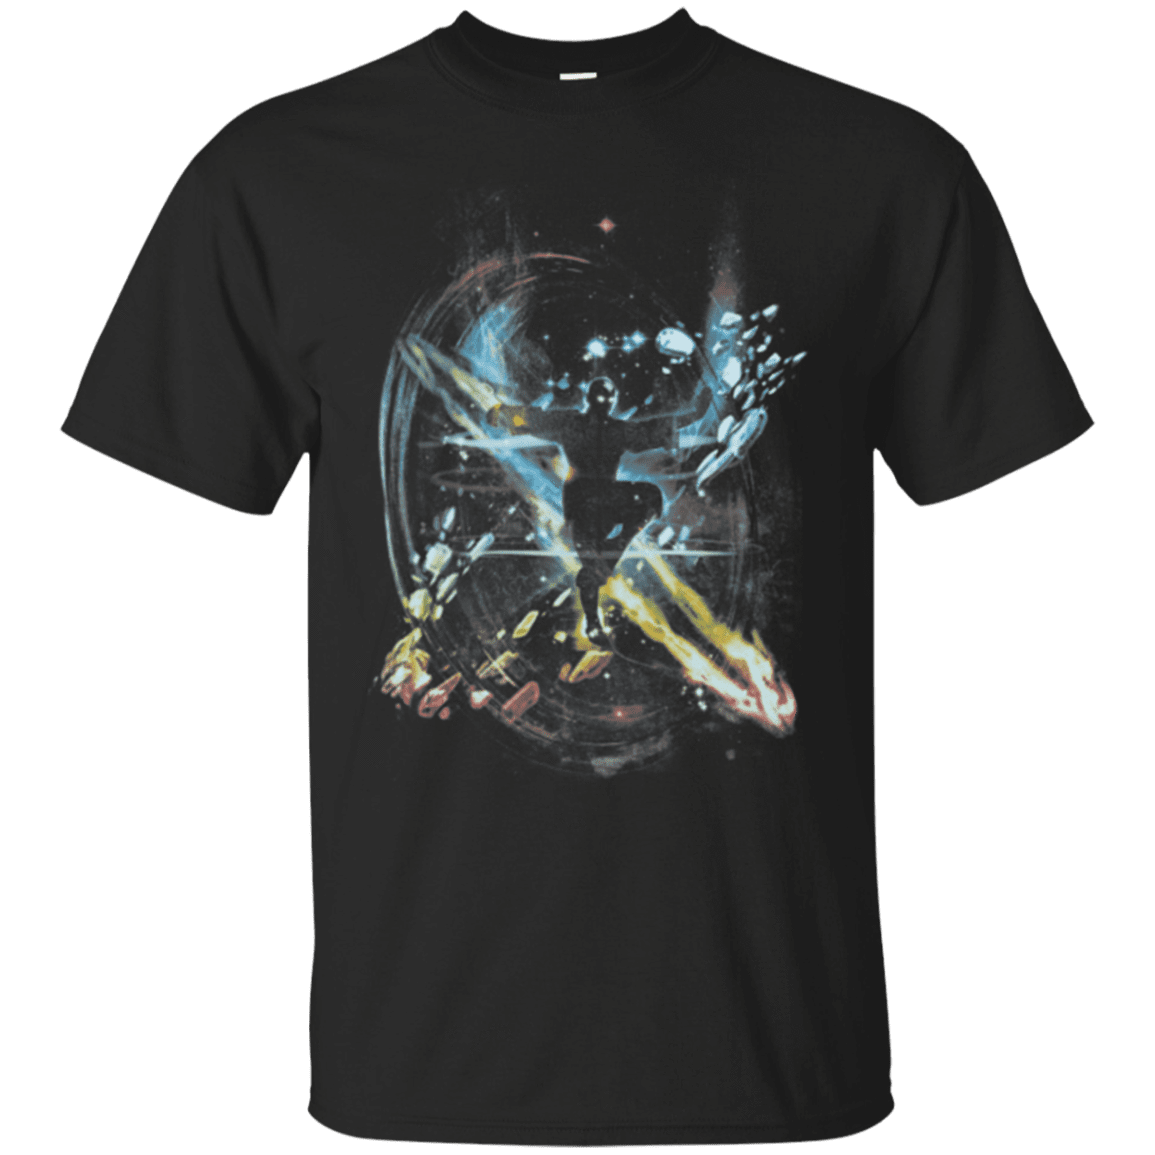 T-Shirts Black / Small Dancing with Elements T-Shirt